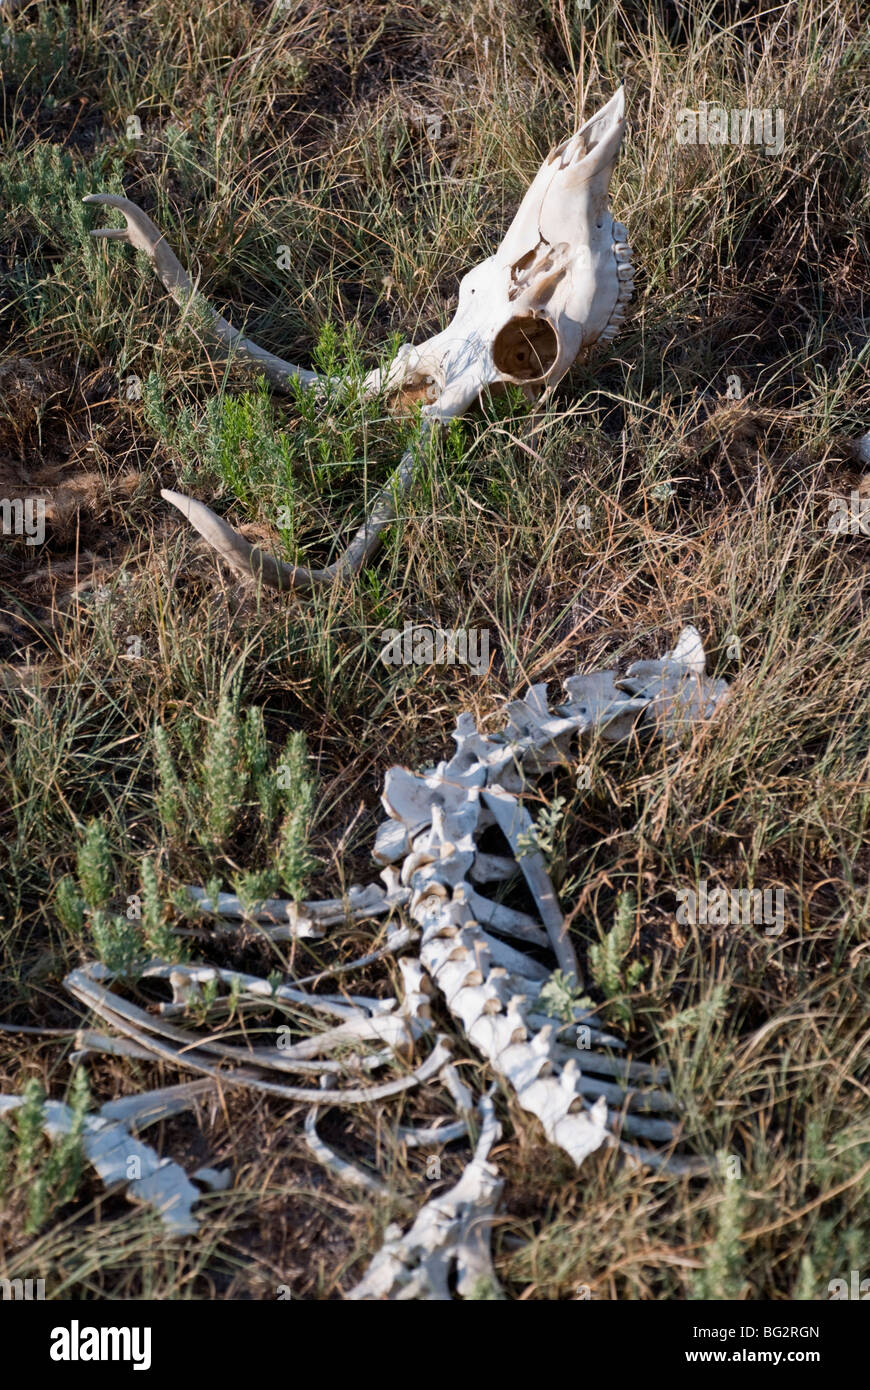 In the Sacramento Mountains, one often finds remains of deer, elk and antelope. Stock Photo